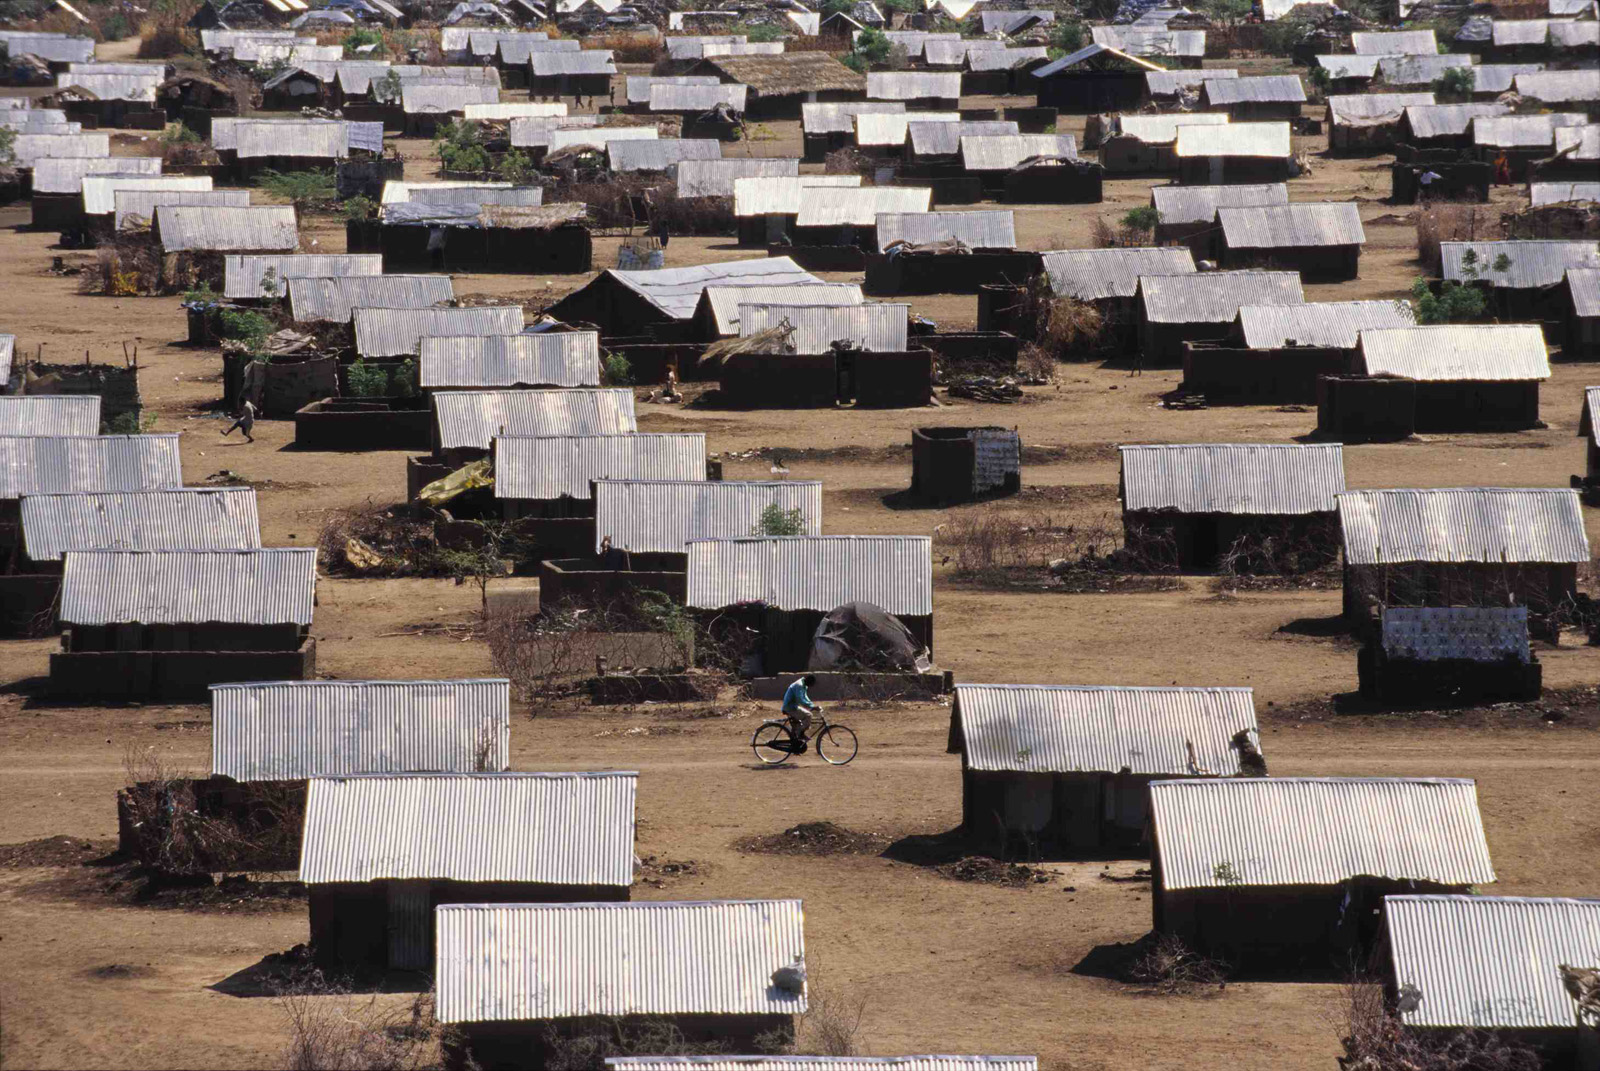 9 Massive Refugee Camps That Are Home To Nearly 1.5 Million People